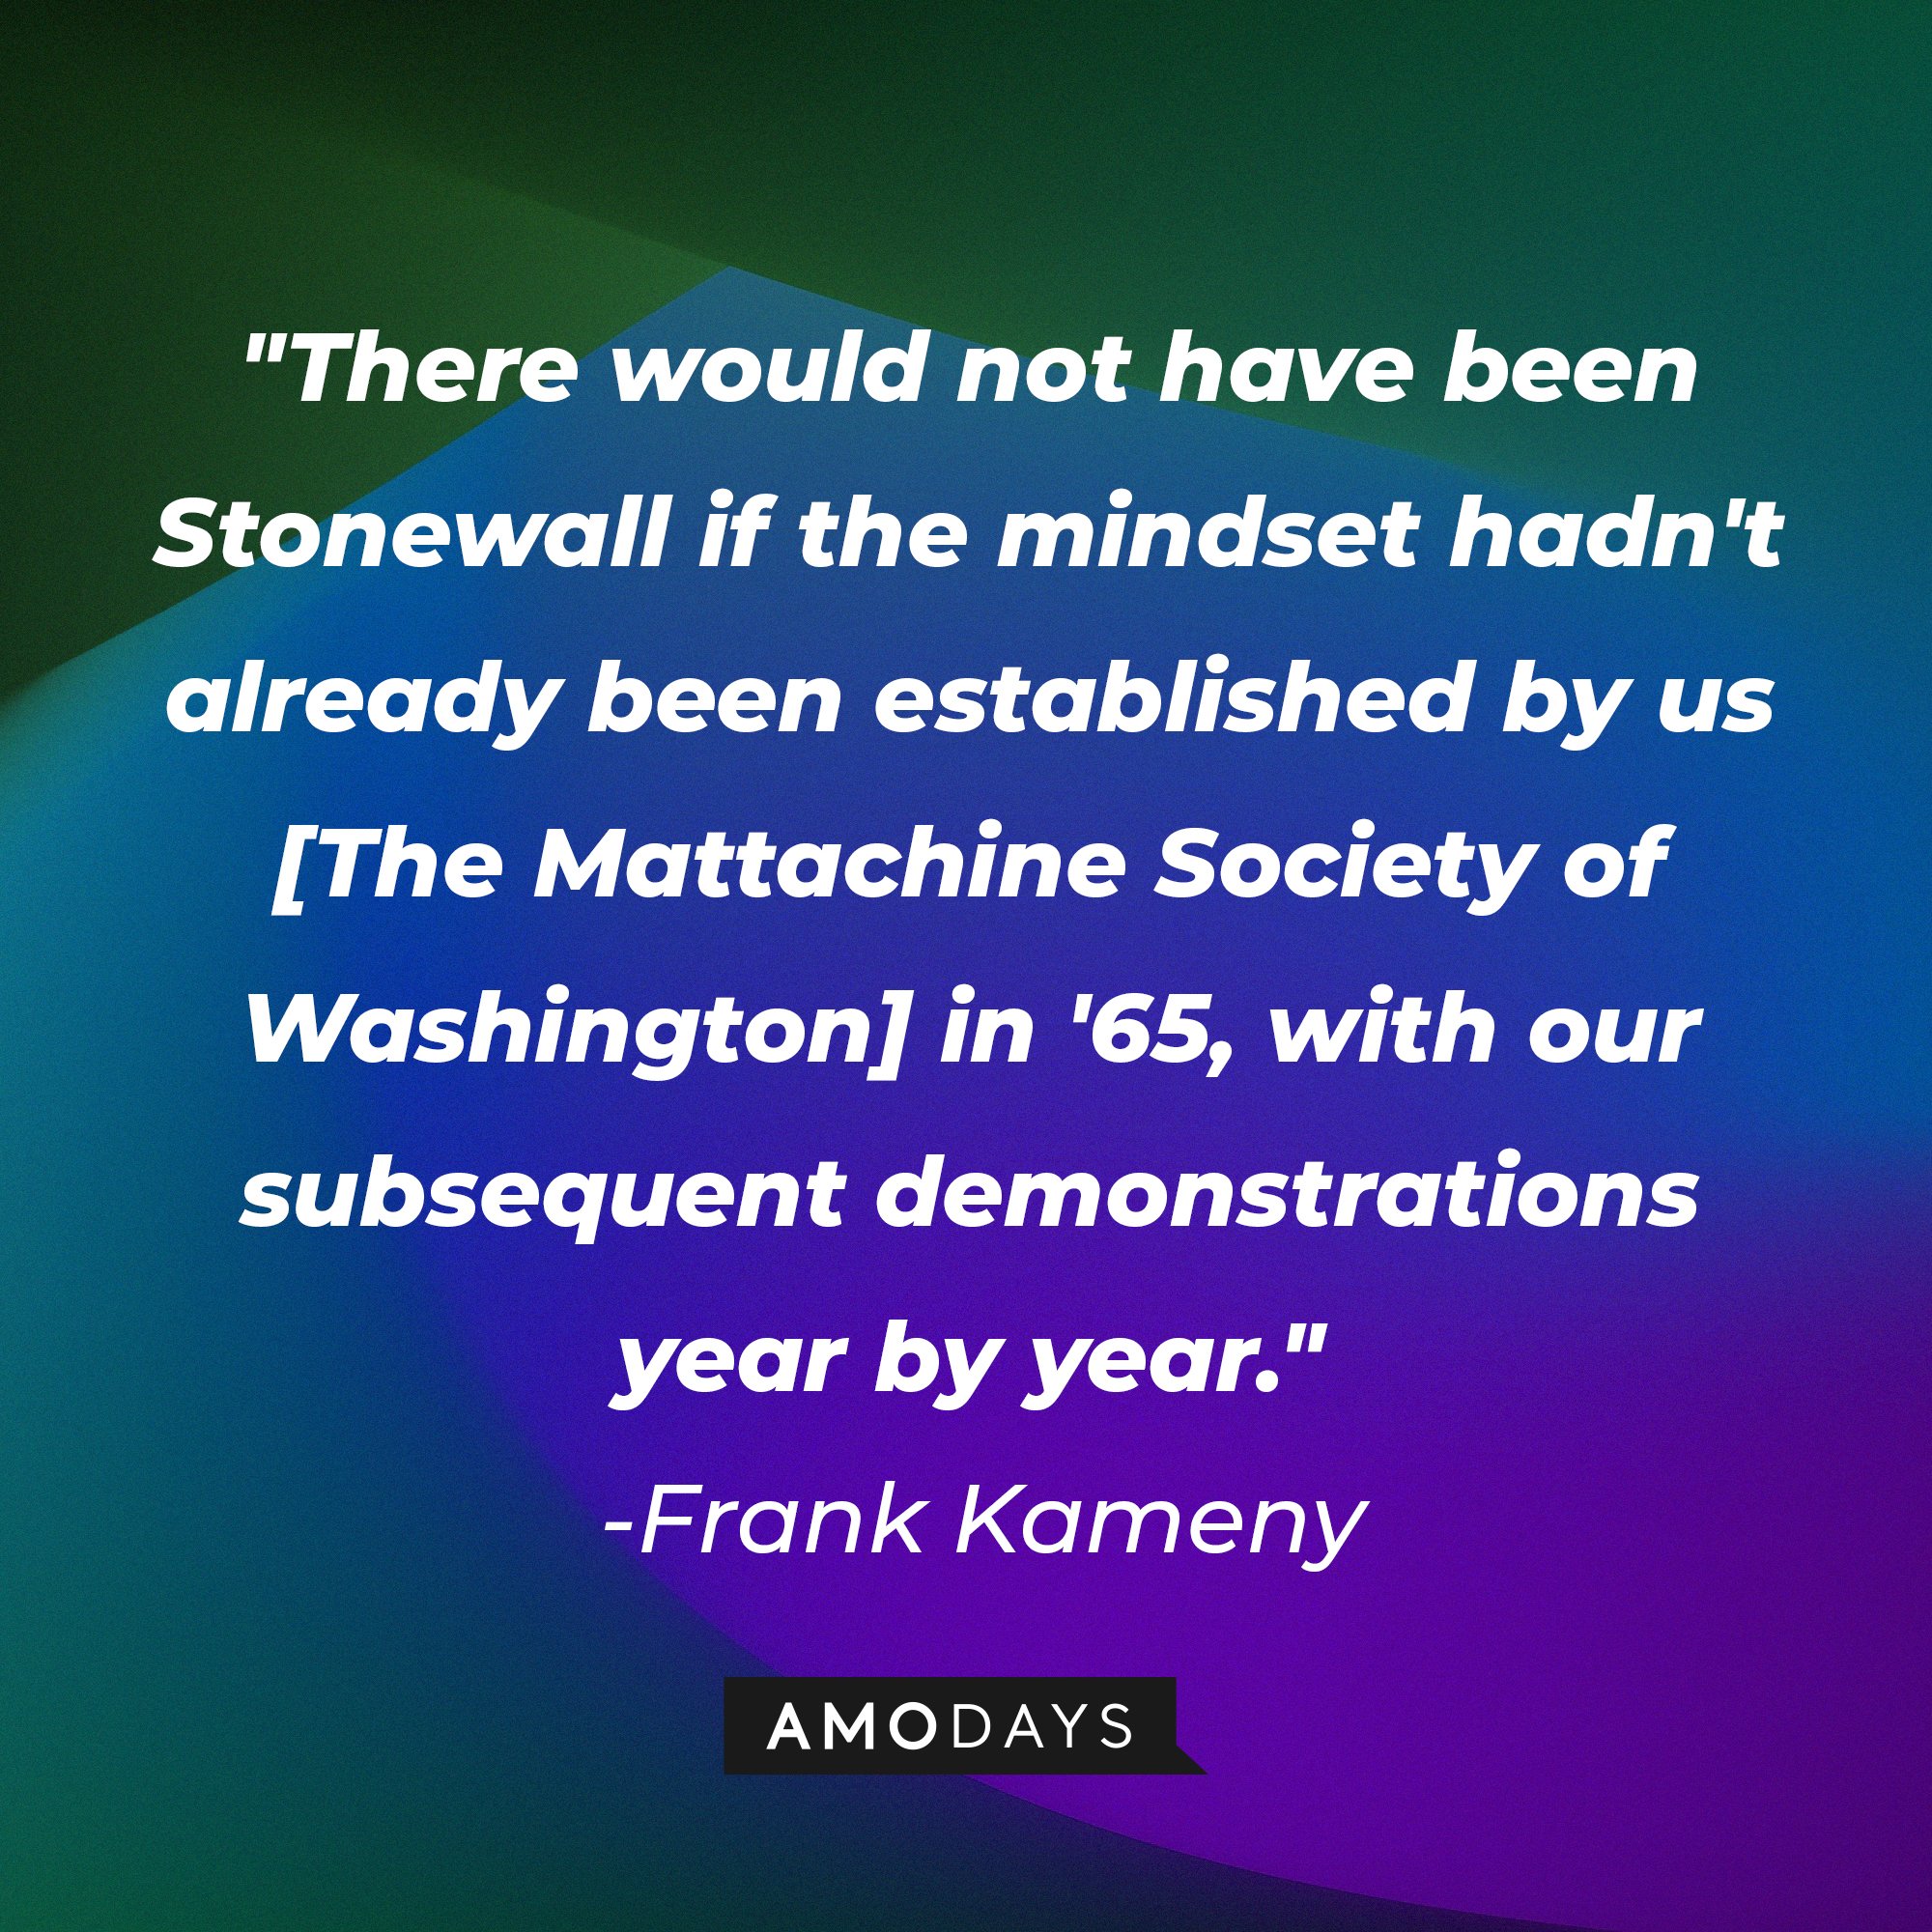 Frank Kameny's quote: "There would not have been Stonewall if the mindset hadn't already been established by us [The Mattachine Society of Washington] in '65, with our subsequent demonstrations year by year.'” | Image: AmoDays